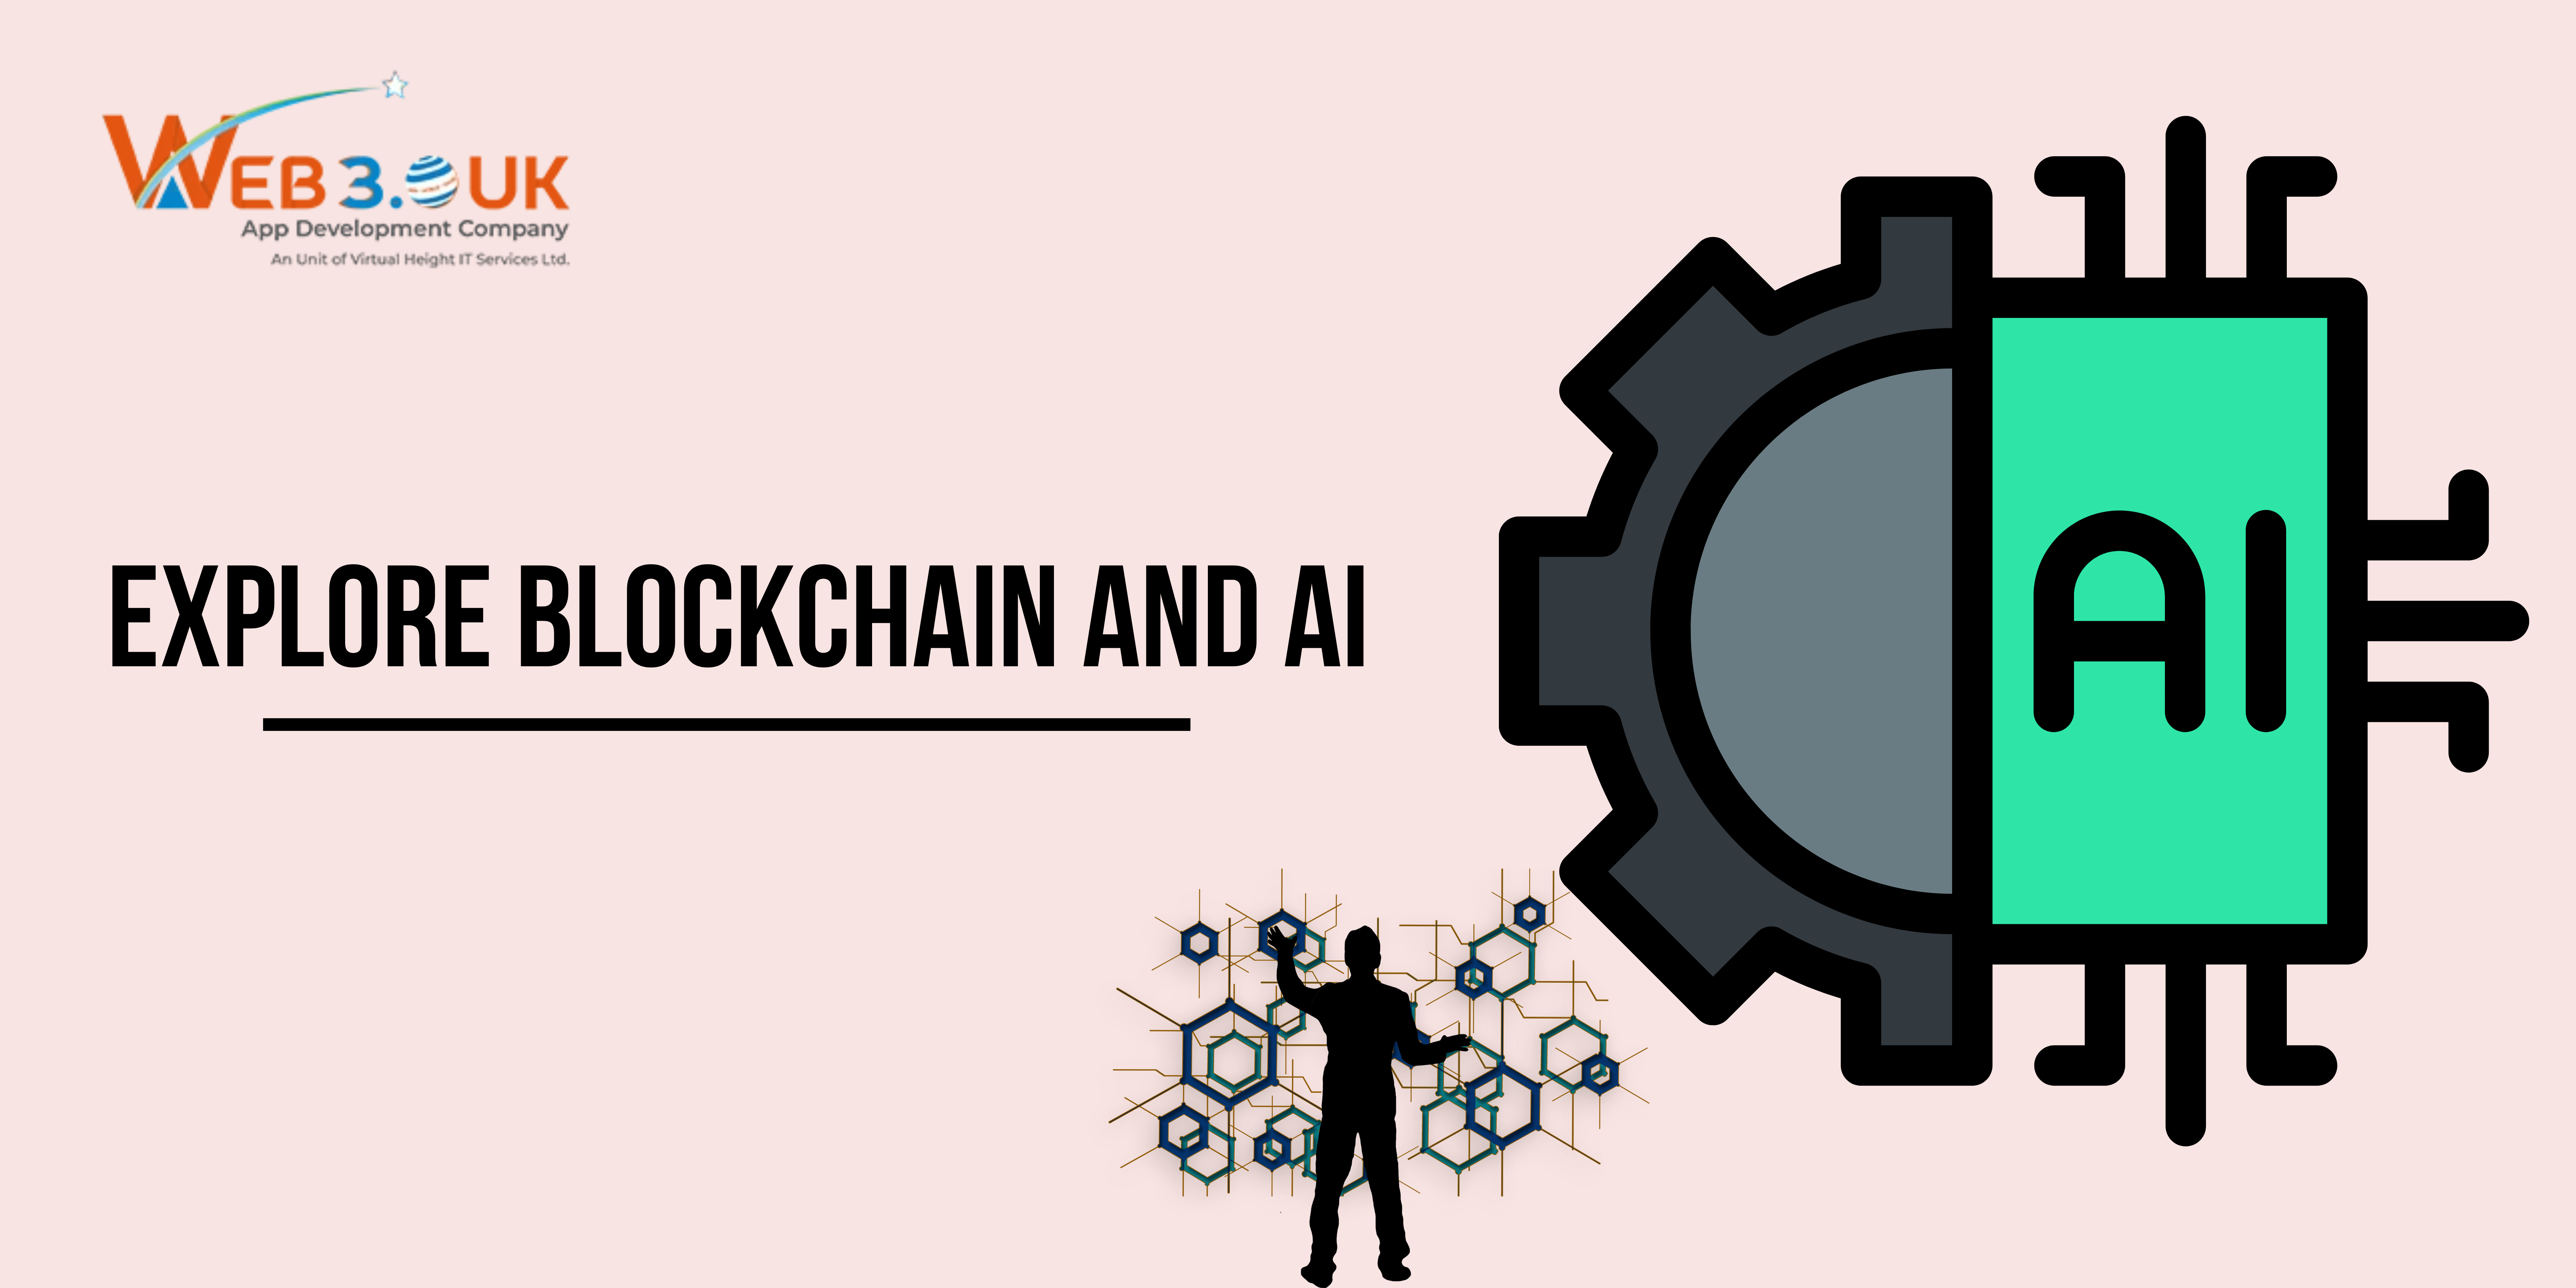 Explore Blockchain and Artificial Intelligence